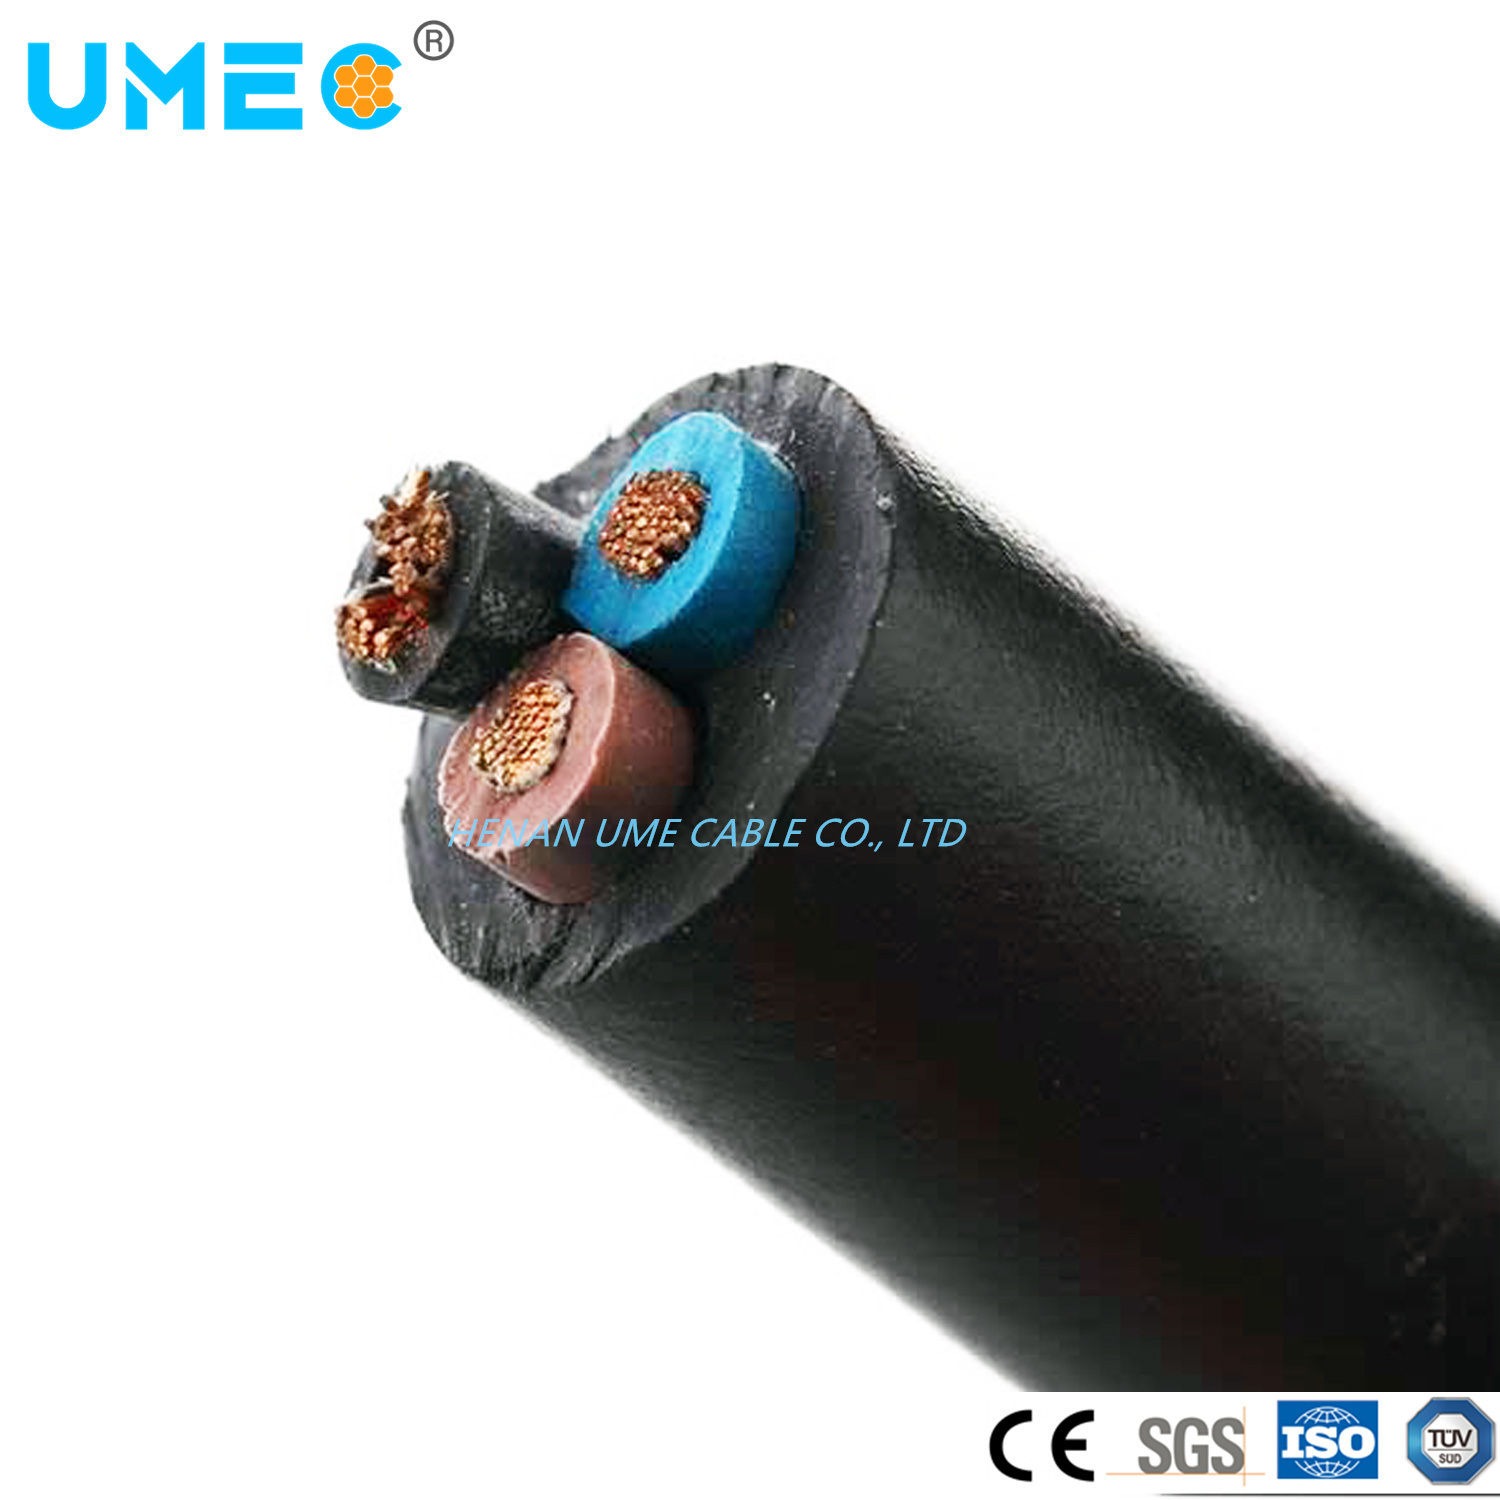 H05rn-F H07rn-F 2g/3G/4G/5g*0.75mm 1.5mm 2.5mm 4sqmm Neoprene Rubber Sheathed Flexible Soow Seoow Rubber Cable Price